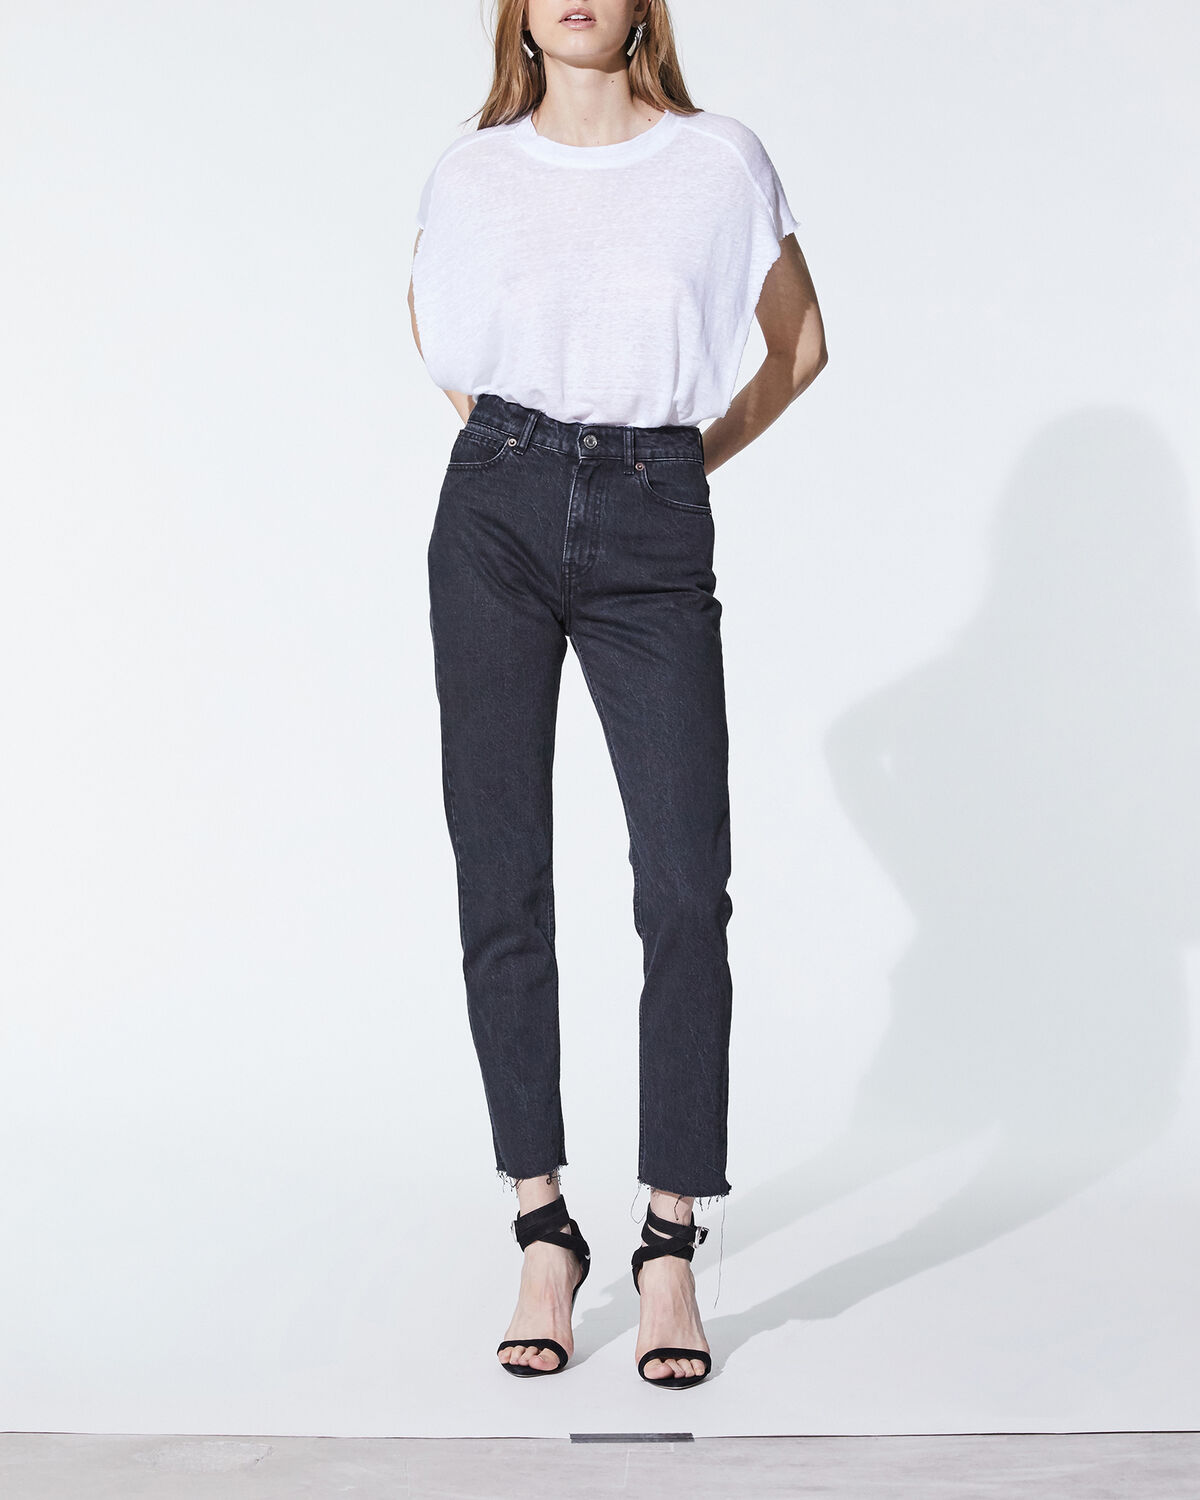 Photo of IRO Paris Famy Jeans Black And Grey - These Straight Cut High Waist Raw Pants Are A Basic Part Of The Women's Wardrobe. They Are Sublimated By Their Frayed Edges. Fall Winter 19